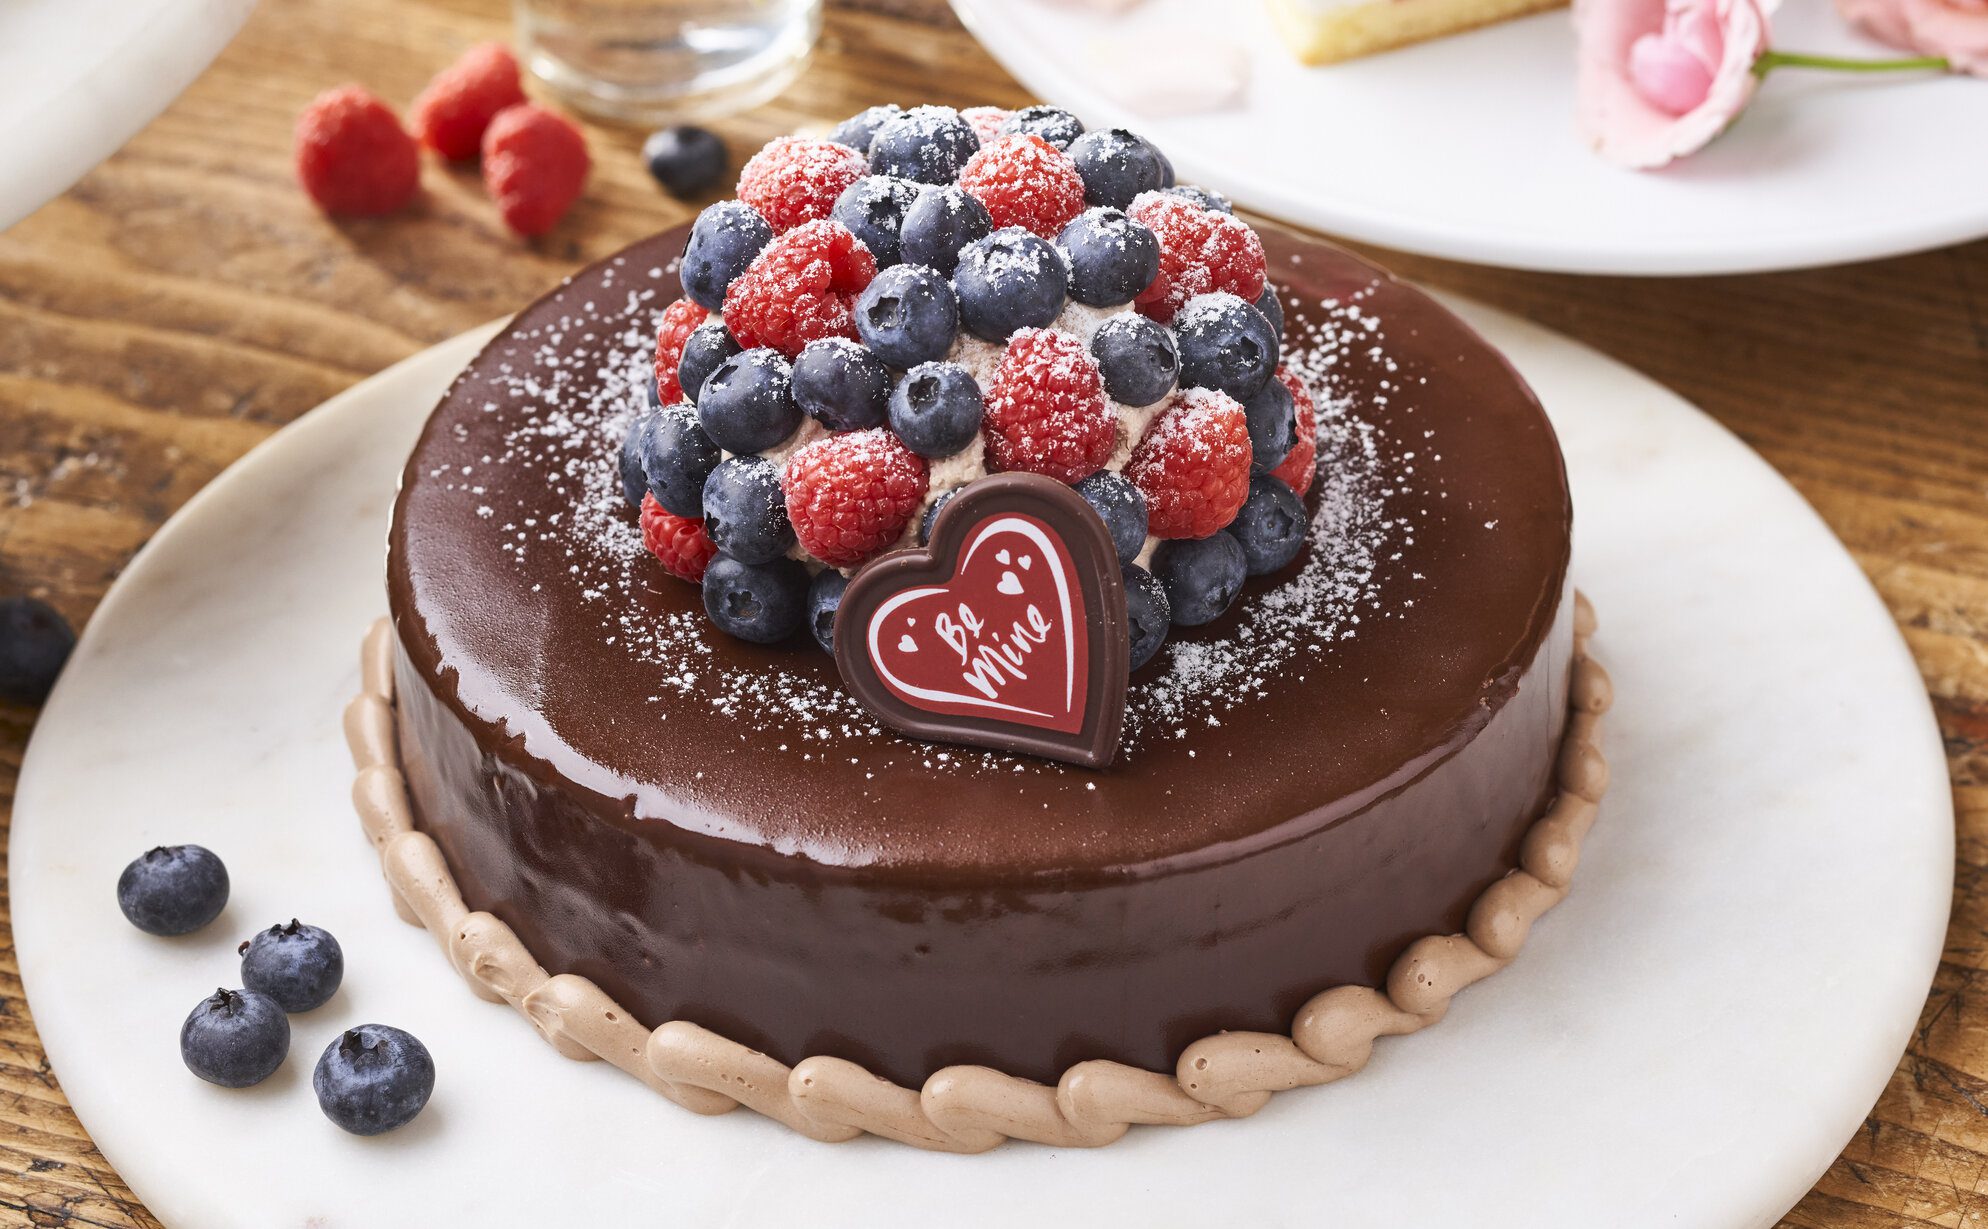 Valentine's Day Cakes from Paris Baguette